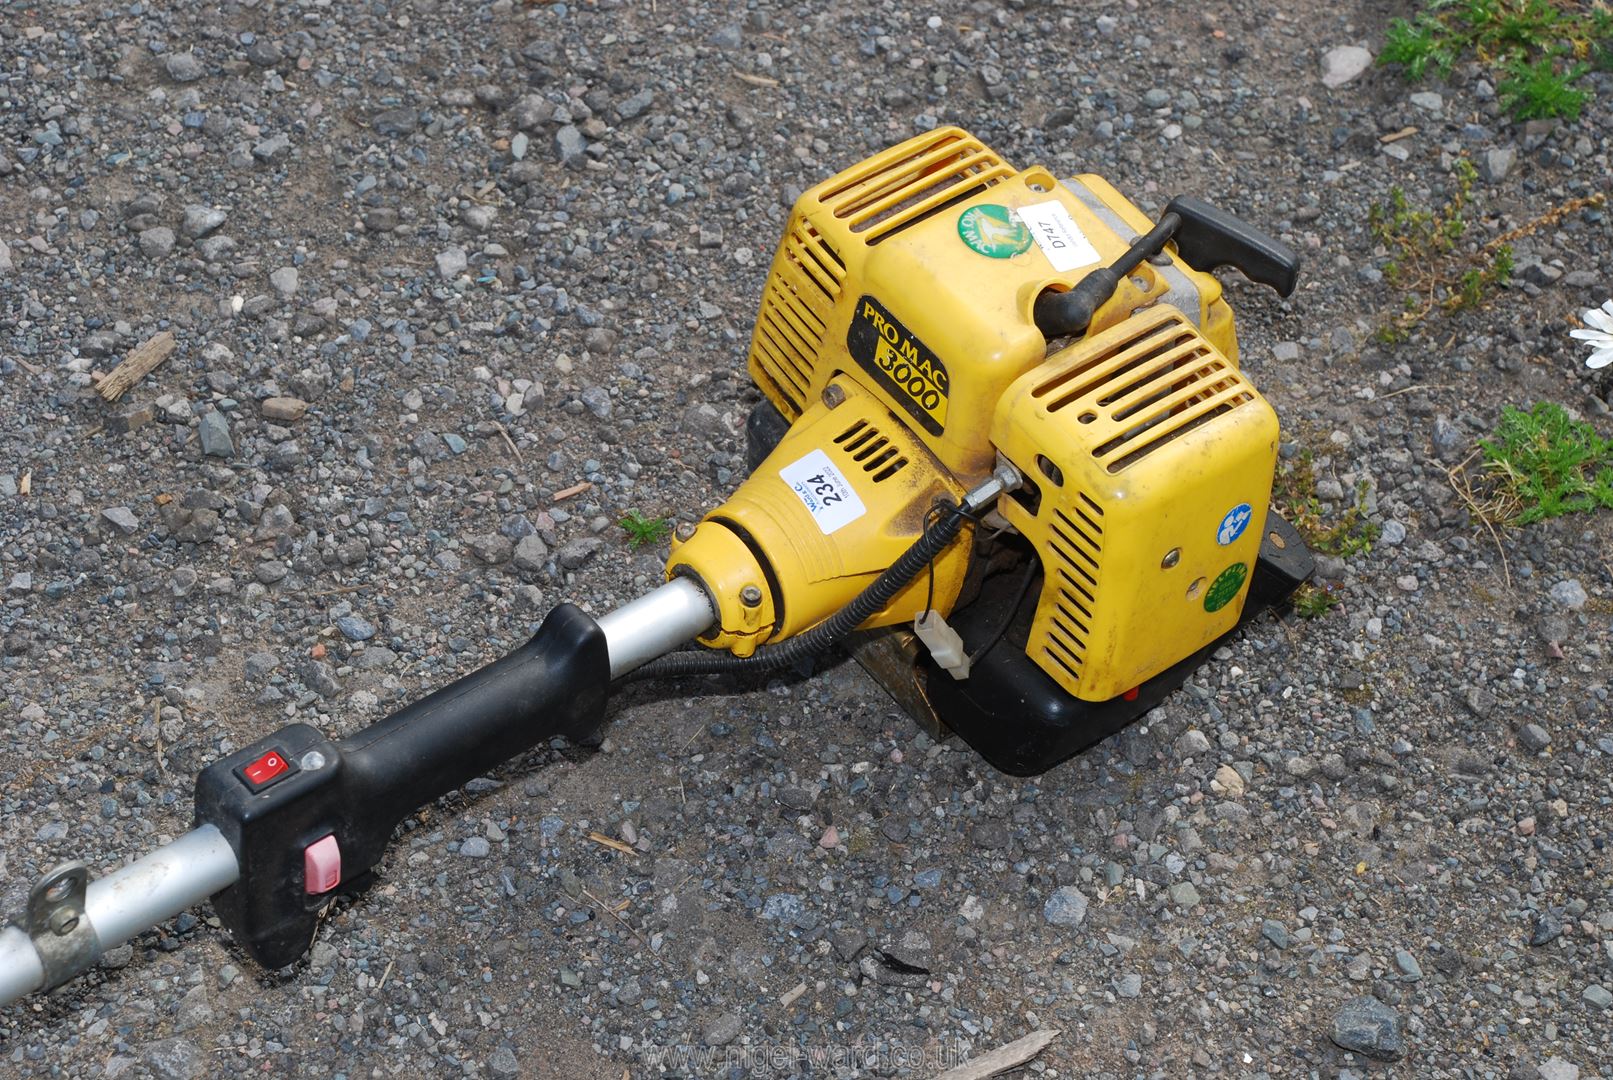 A Promac petrol strimmer. - Image 2 of 3